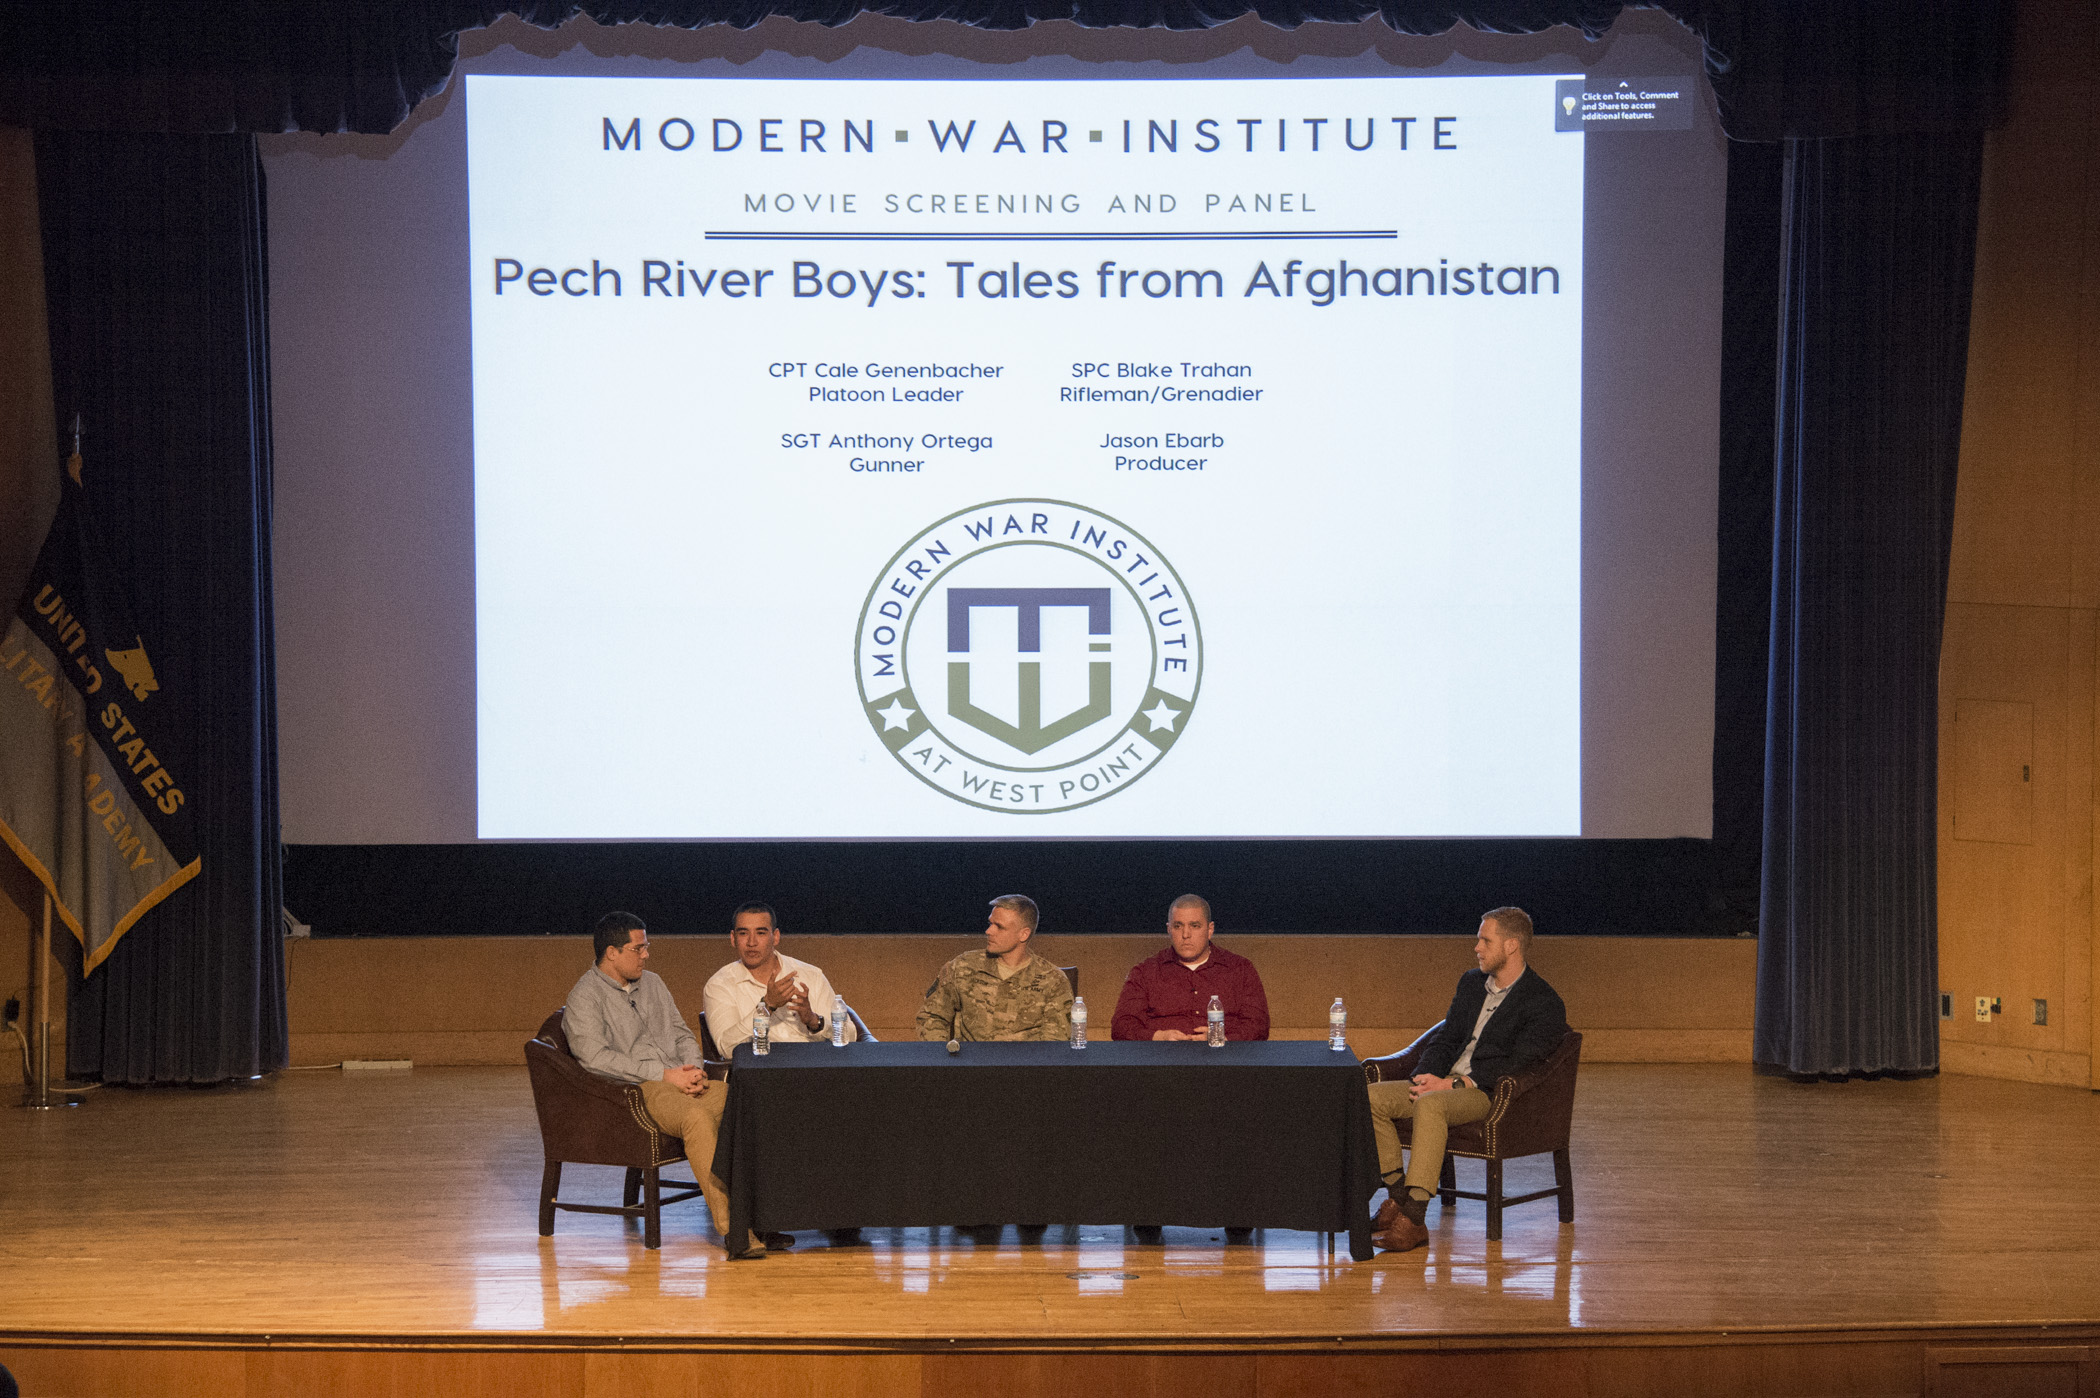 MWI shows Documentary “Pech River Boys: Tales from Afghanistan”